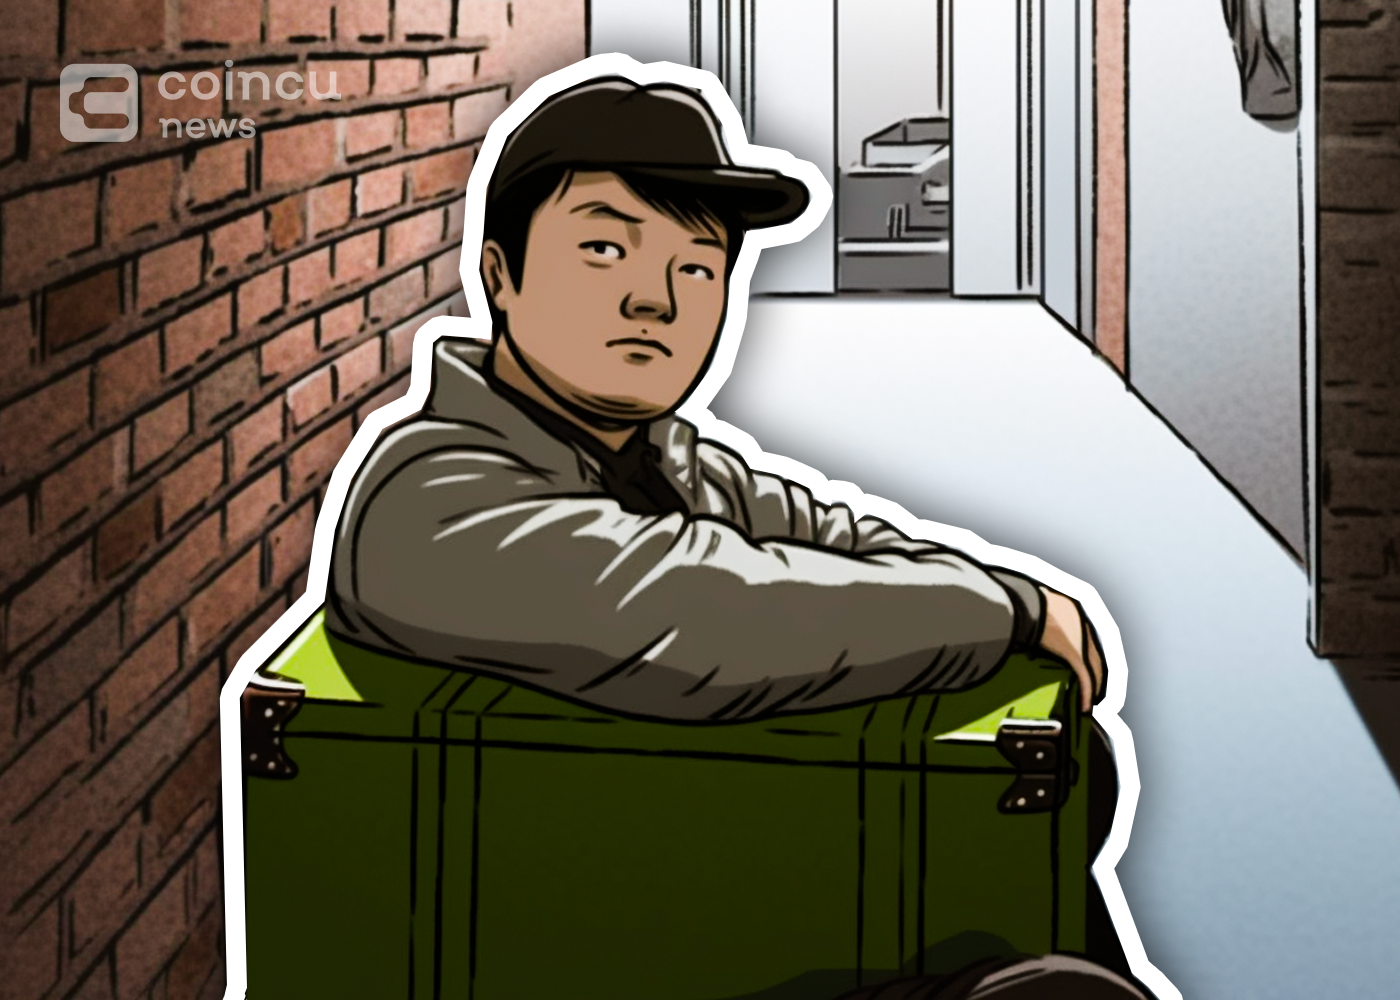 Do Kwon Transfers 239 BTC To The Wallet That Stored 5,292 BTC: Report